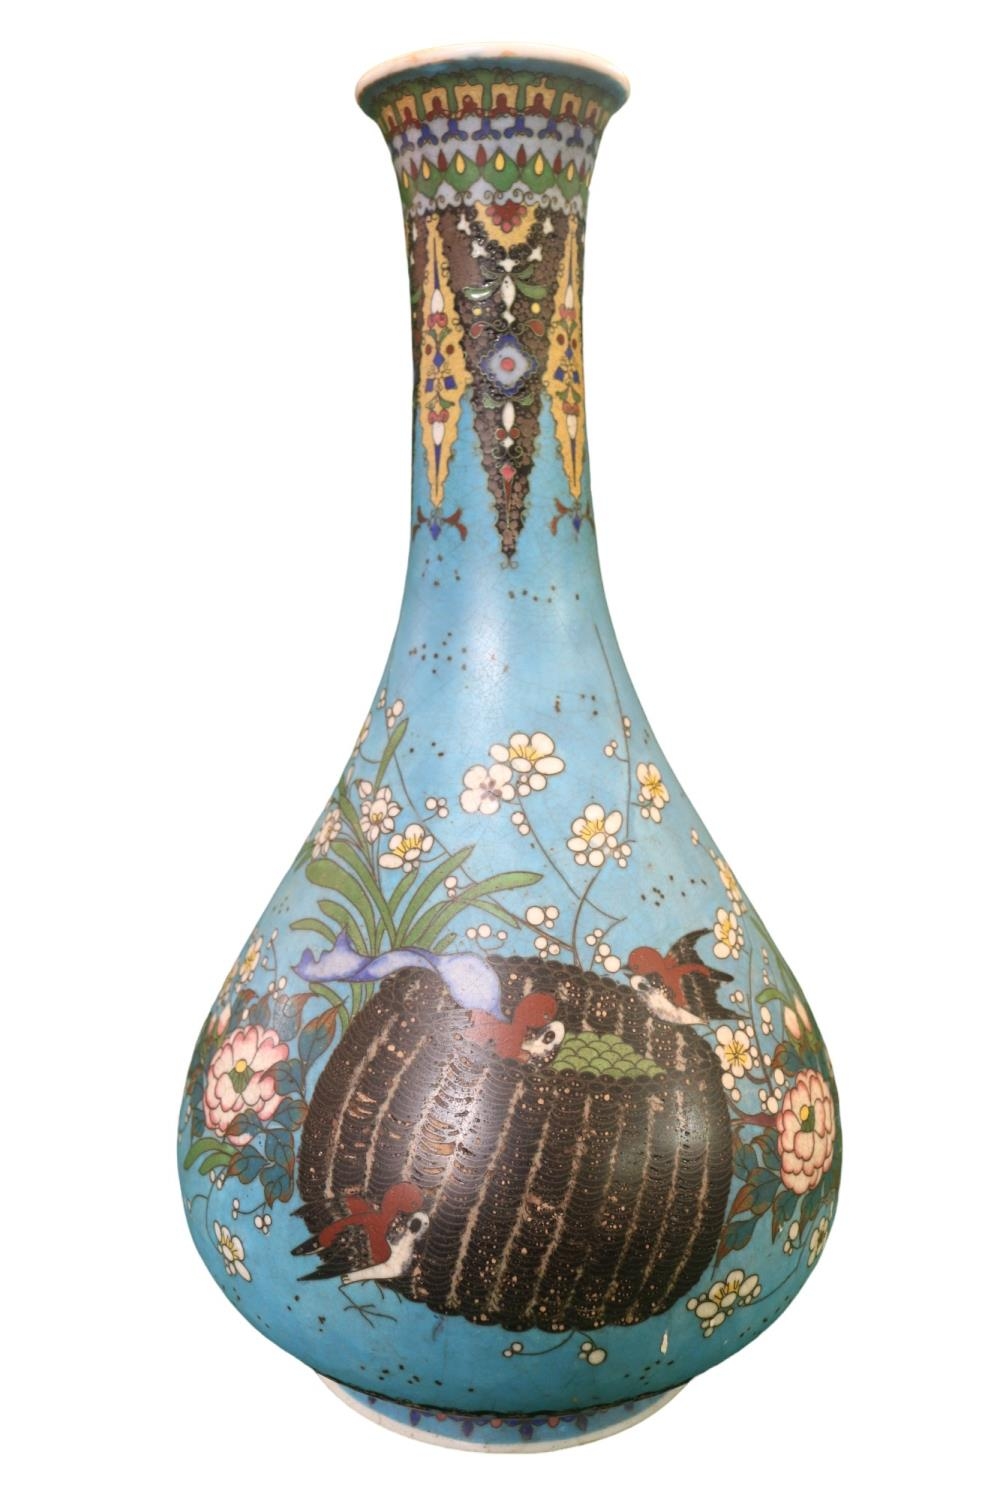 Japanese Meiji period vase decorated with Flora and fauna with Fancy Archaic design border. Six